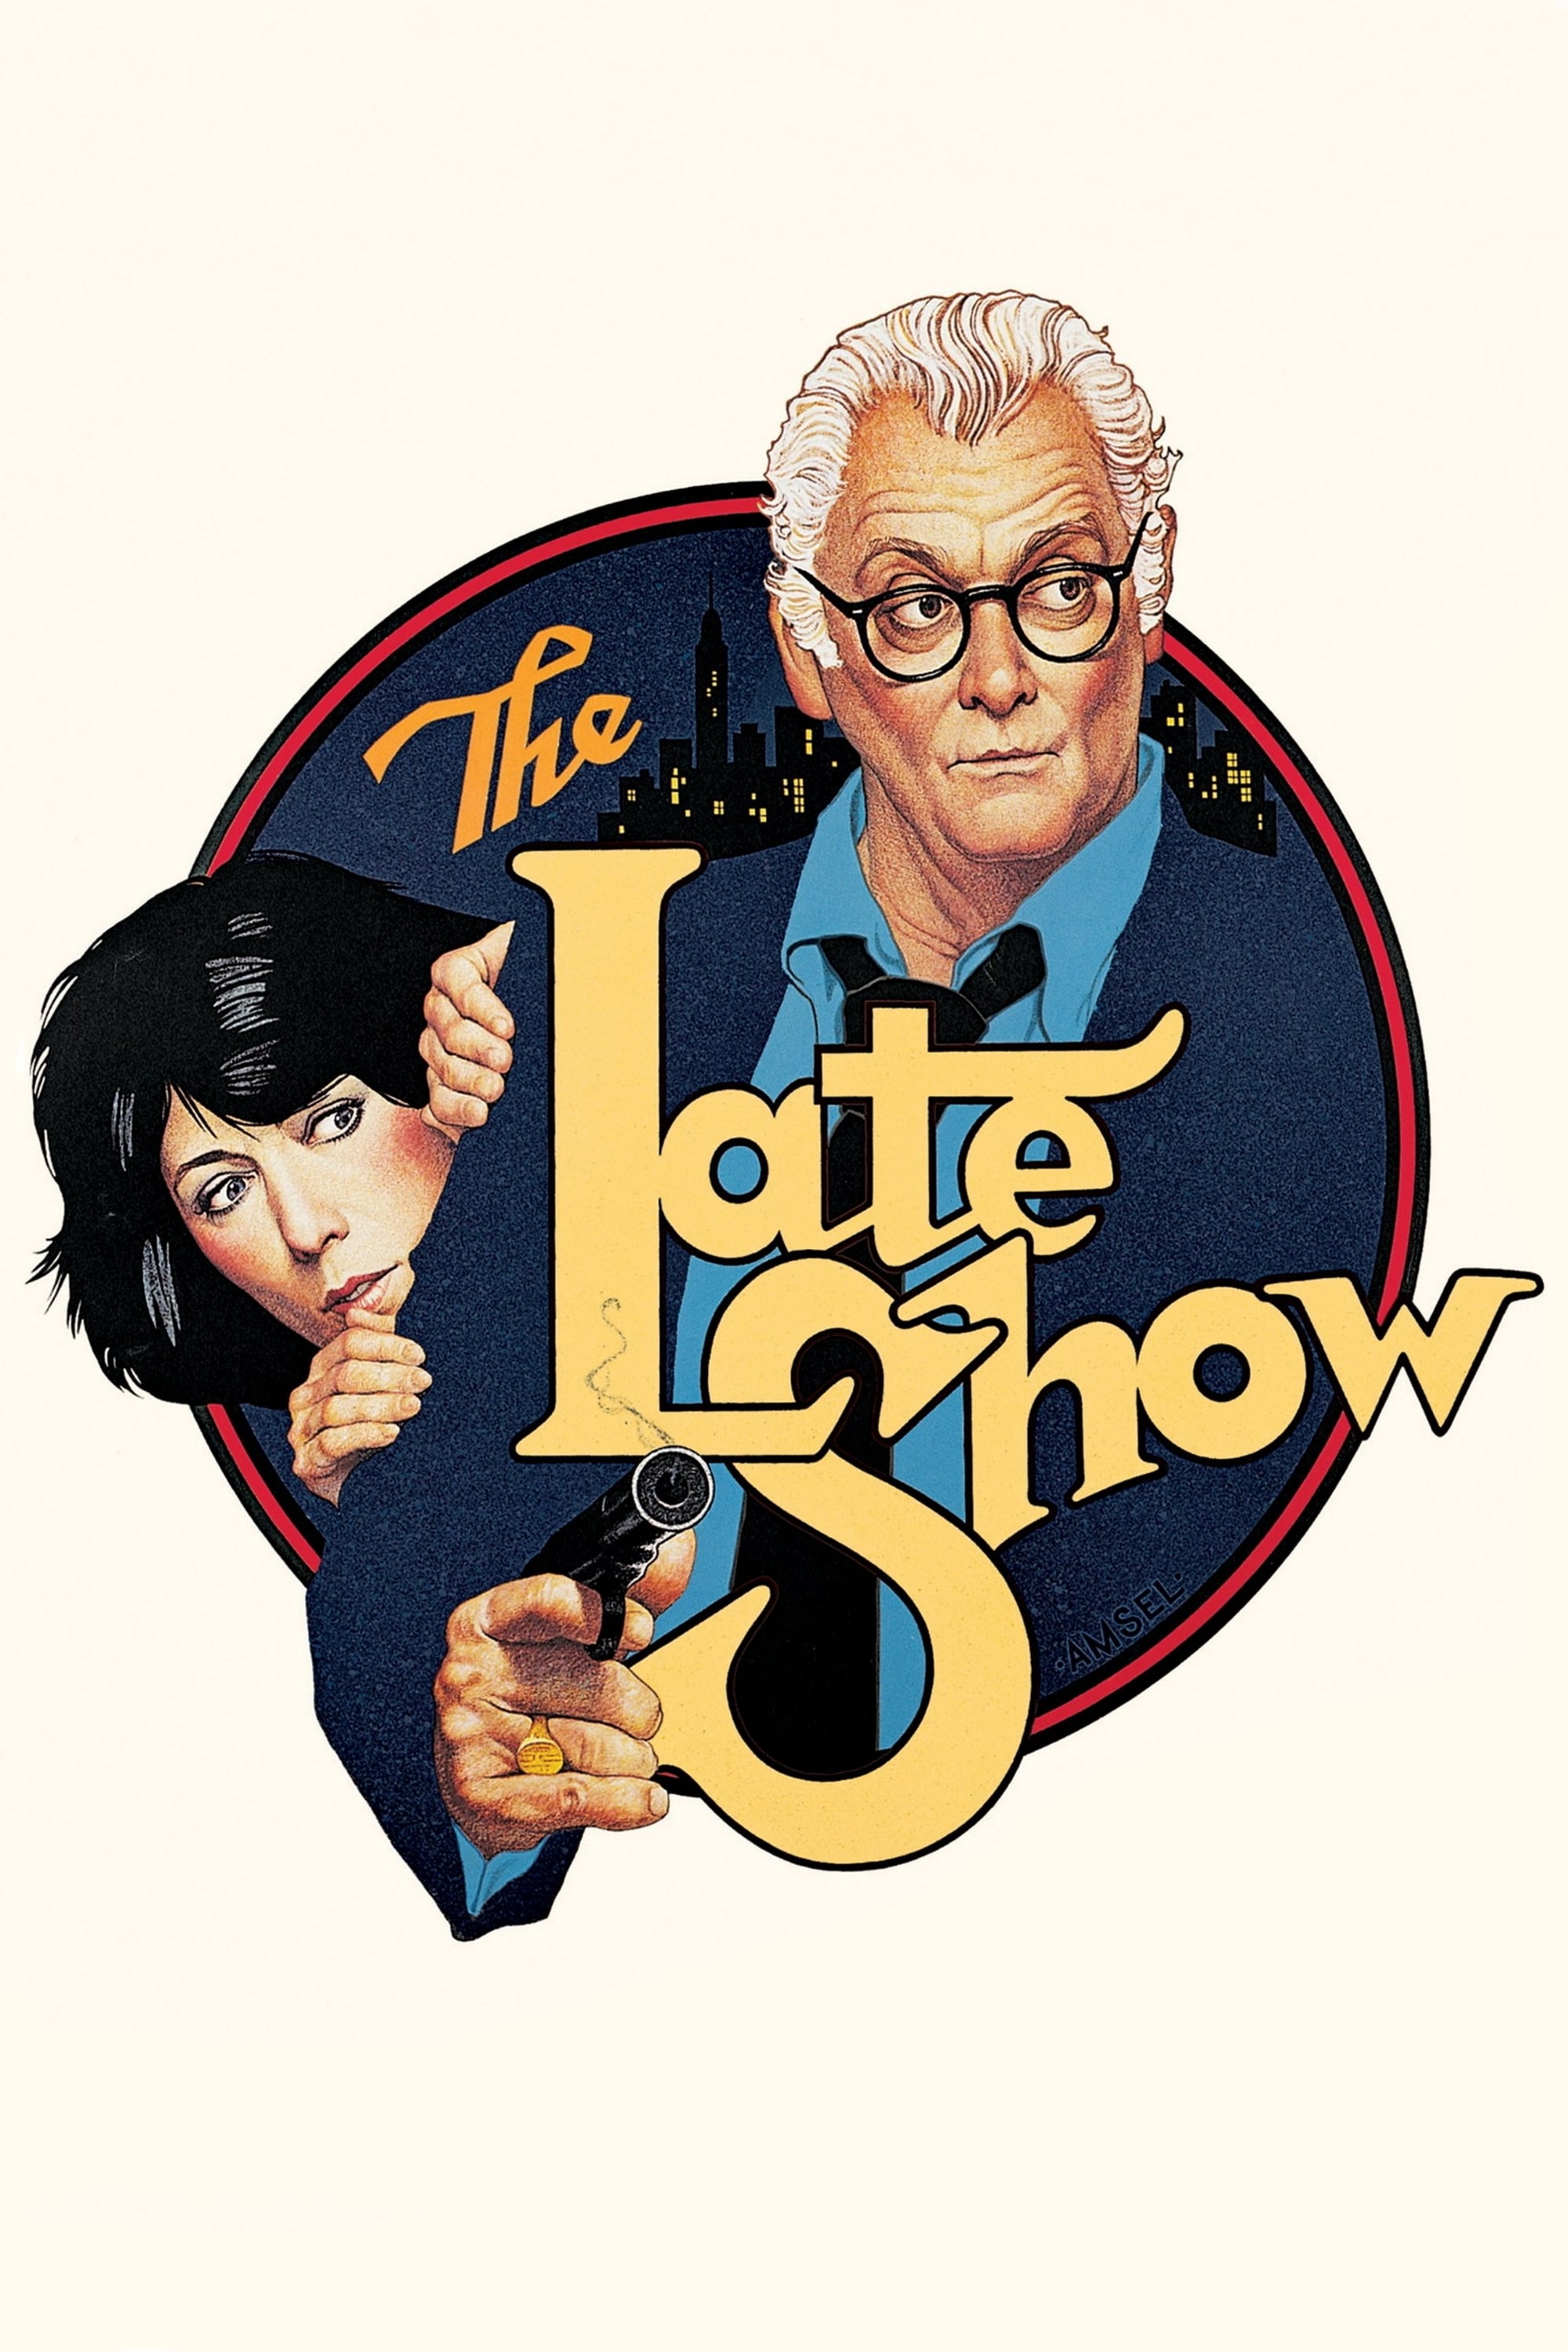 The Late Show (1977)